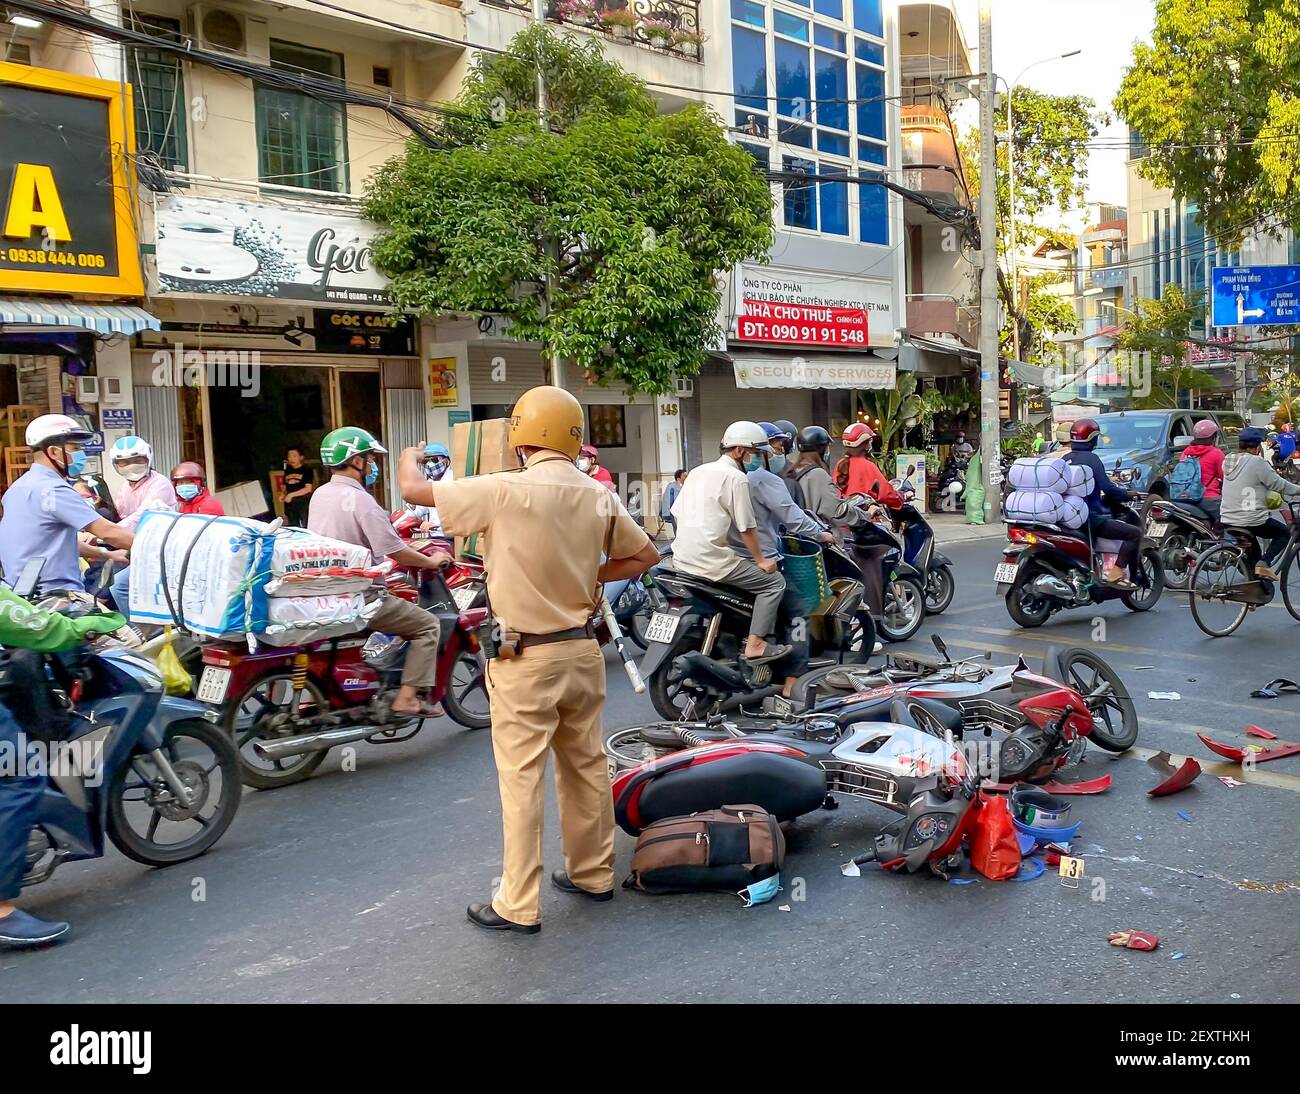 Pho Quang Street, Tan Binh District, Ho Chi Minh City, Vietnam - March 4, 2021: A traffic accident between two motorcycles, the police are handling th Stock Photo